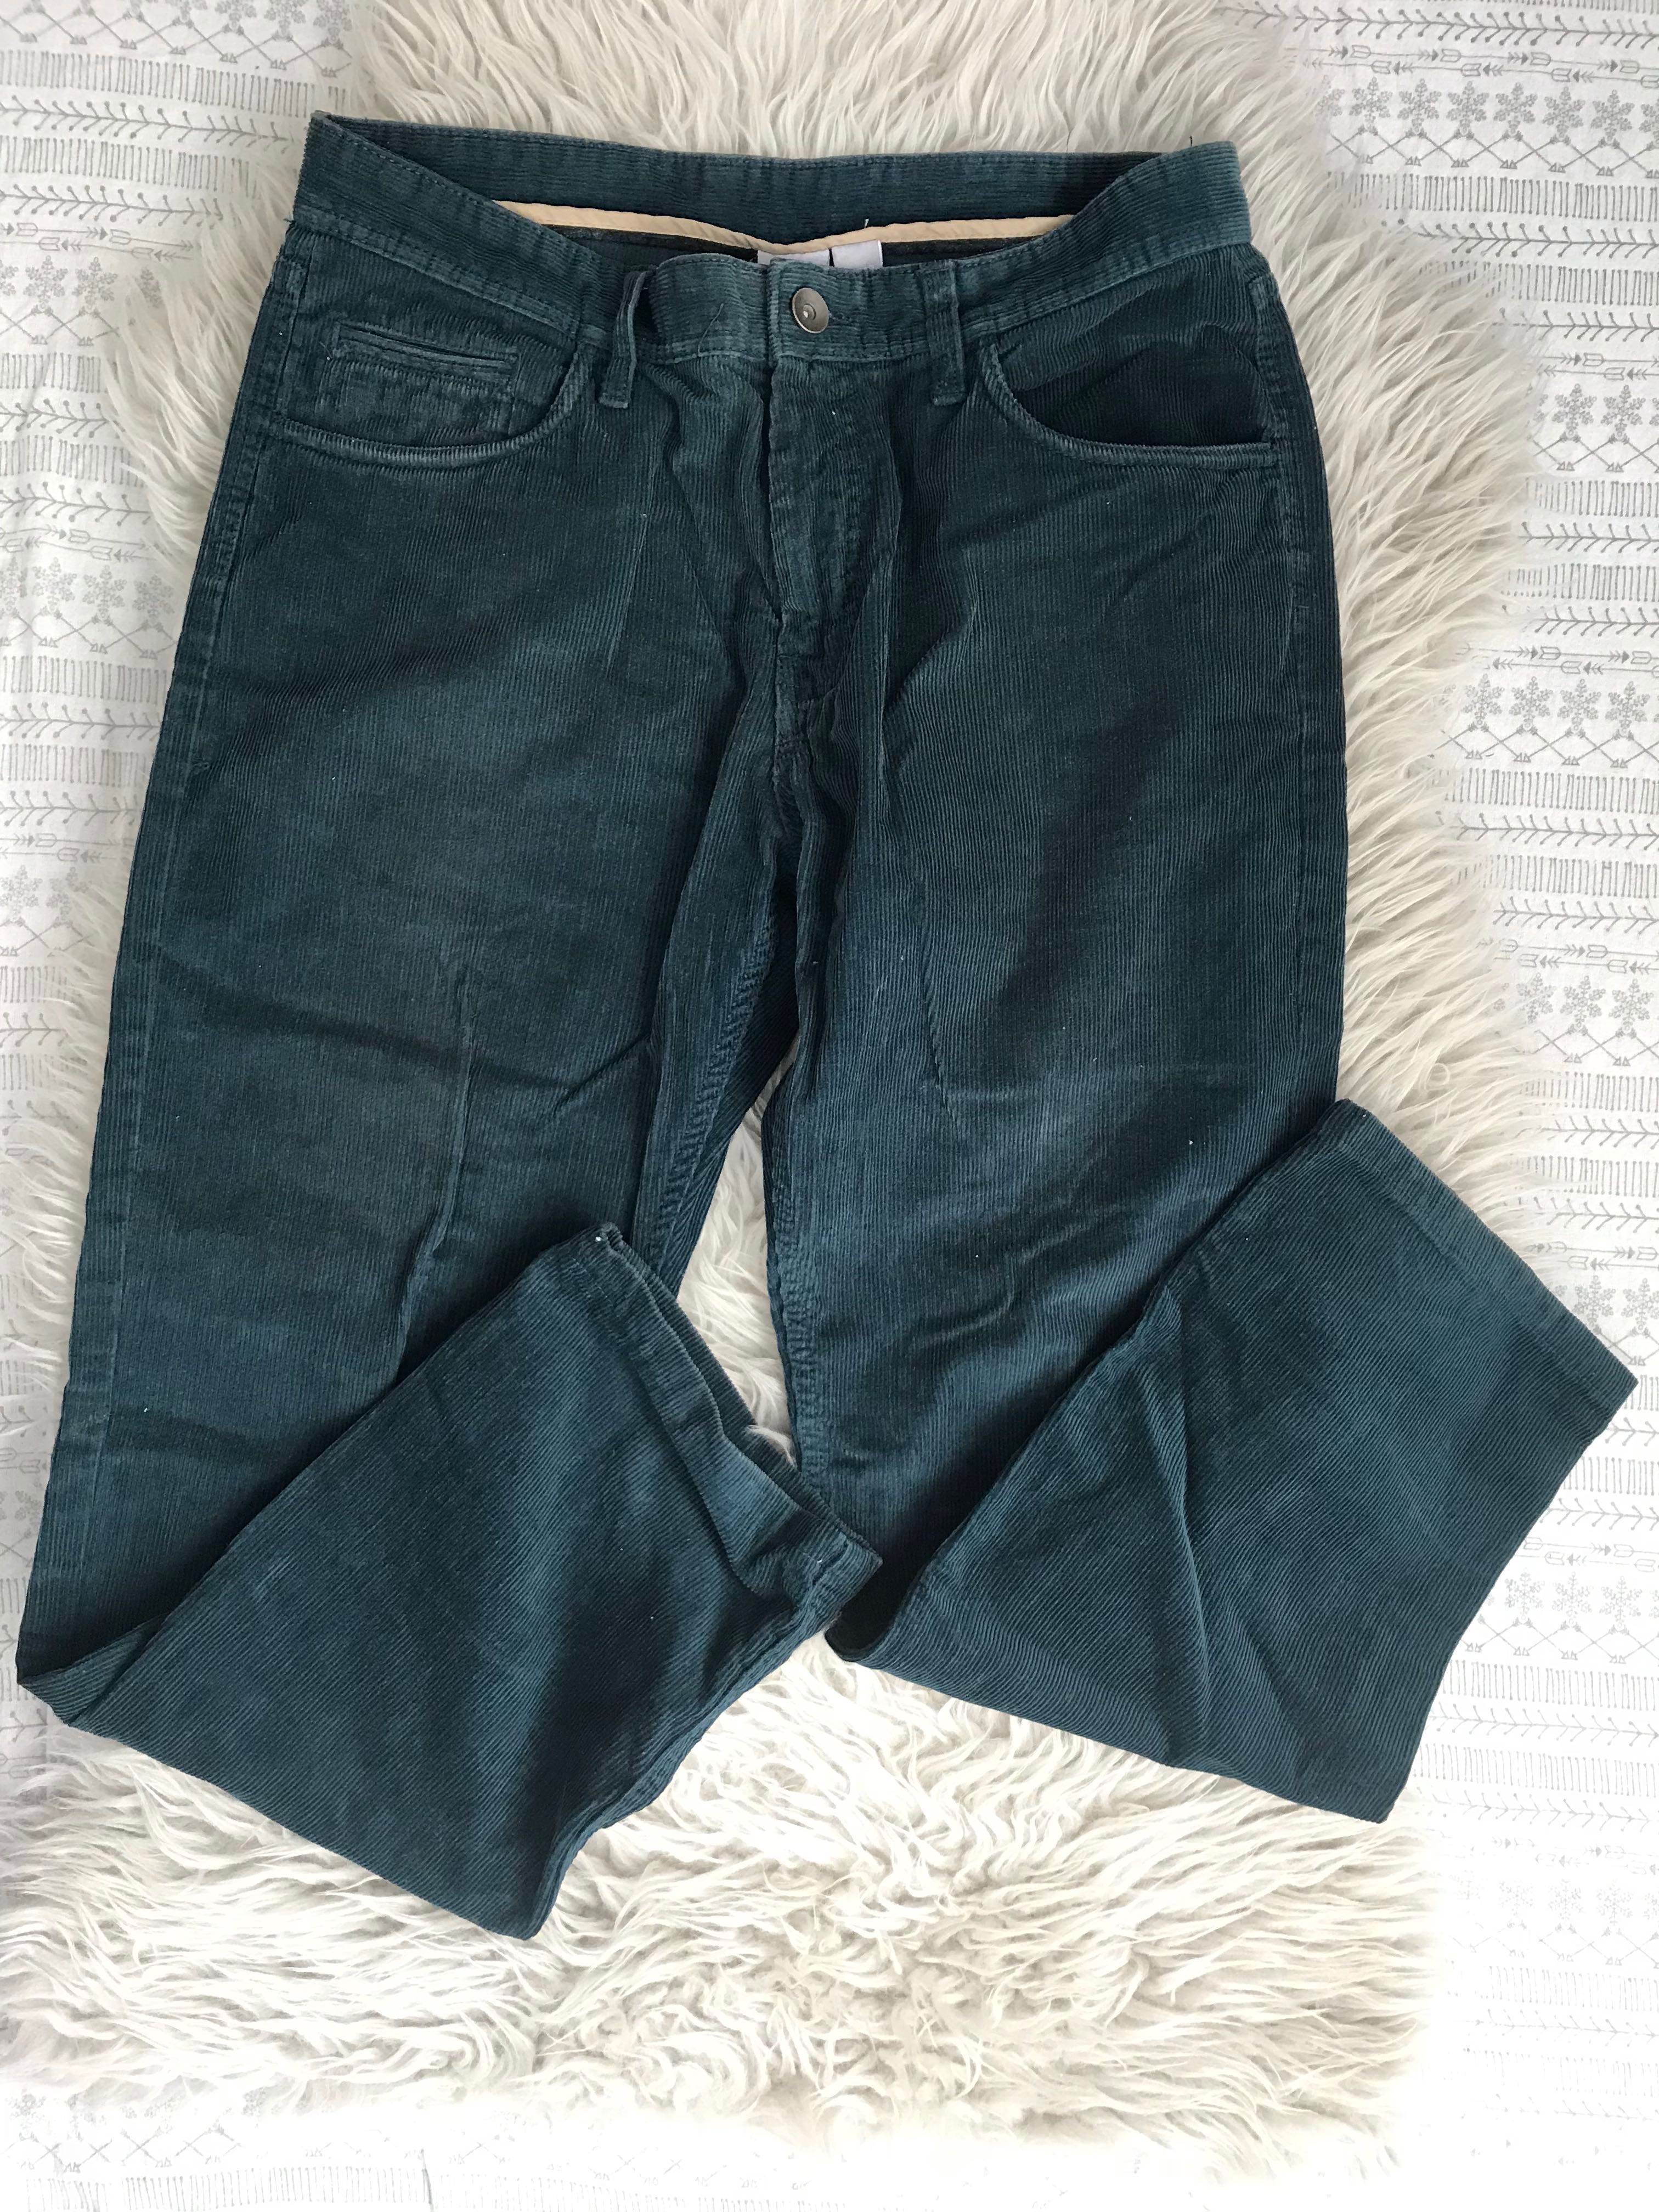 forest green corduroy pants